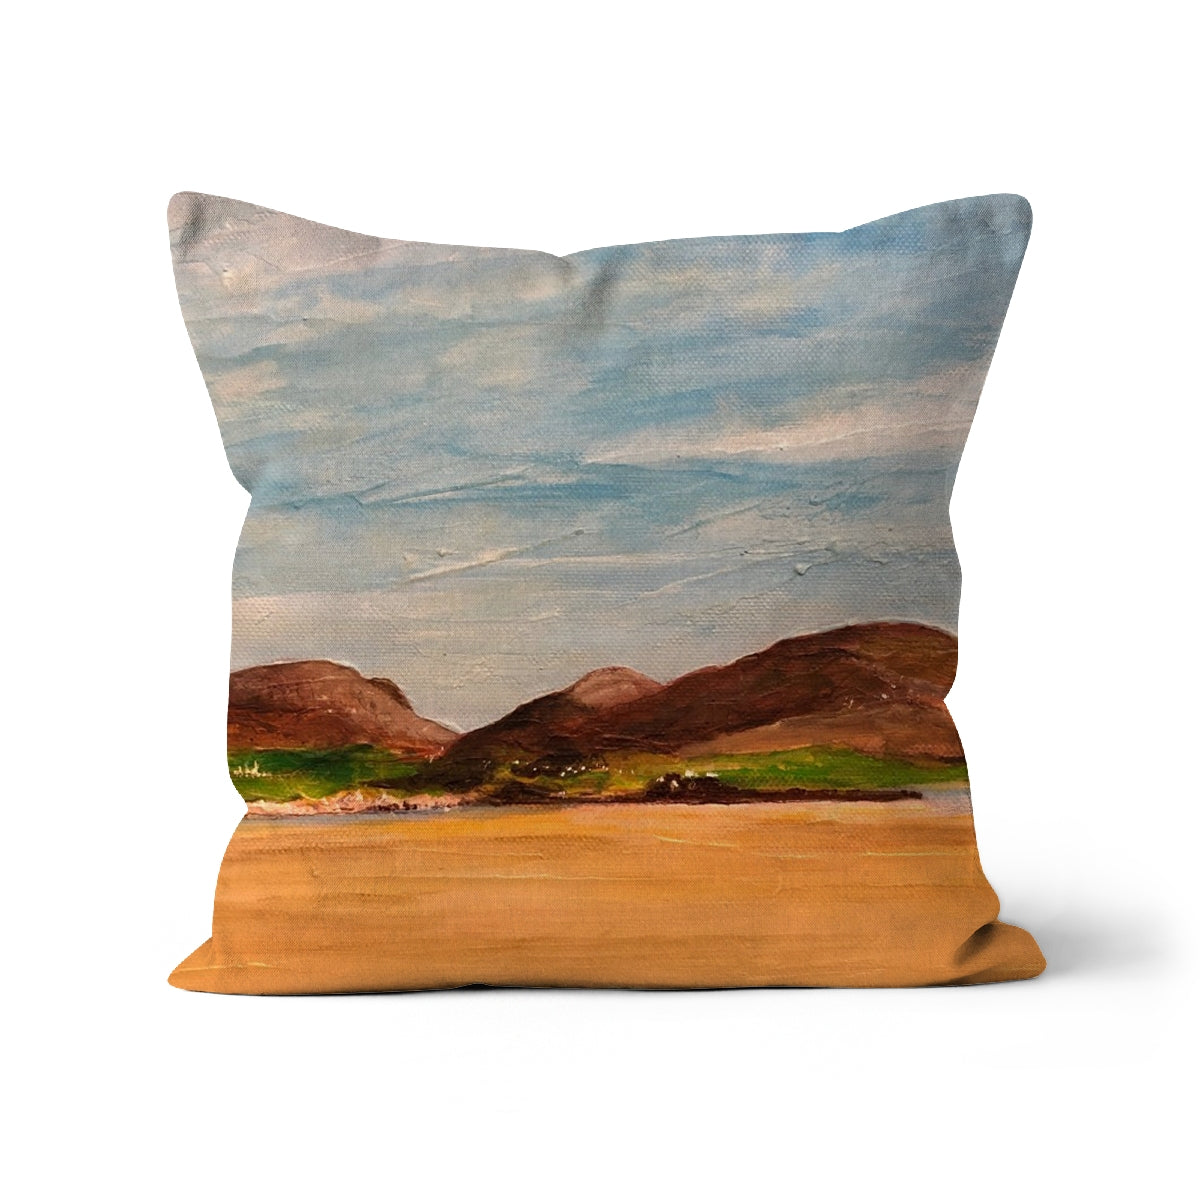 Uig Sands Lewis Art Gifts Cushion-Cushions-Hebridean Islands Art Gallery-Faux Suede-24"x24"-Paintings, Prints, Homeware, Art Gifts From Scotland By Scottish Artist Kevin Hunter